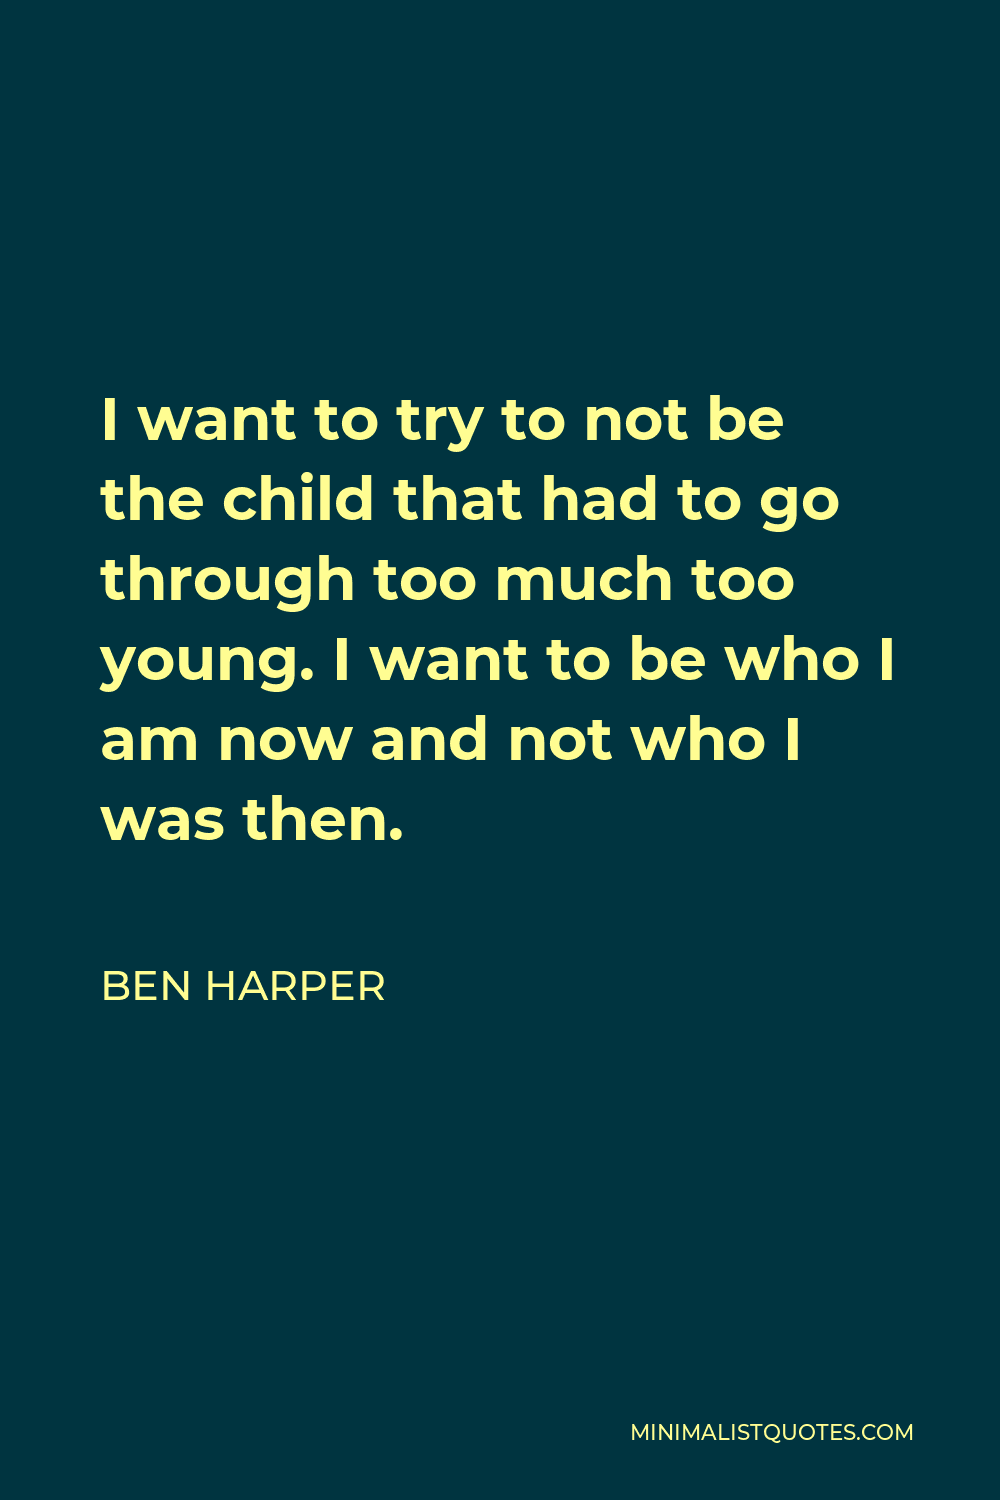 Ben Harper Quote - I want to try to not be the child that had to go through too much too young. I want to be who I am now and not who I was then.